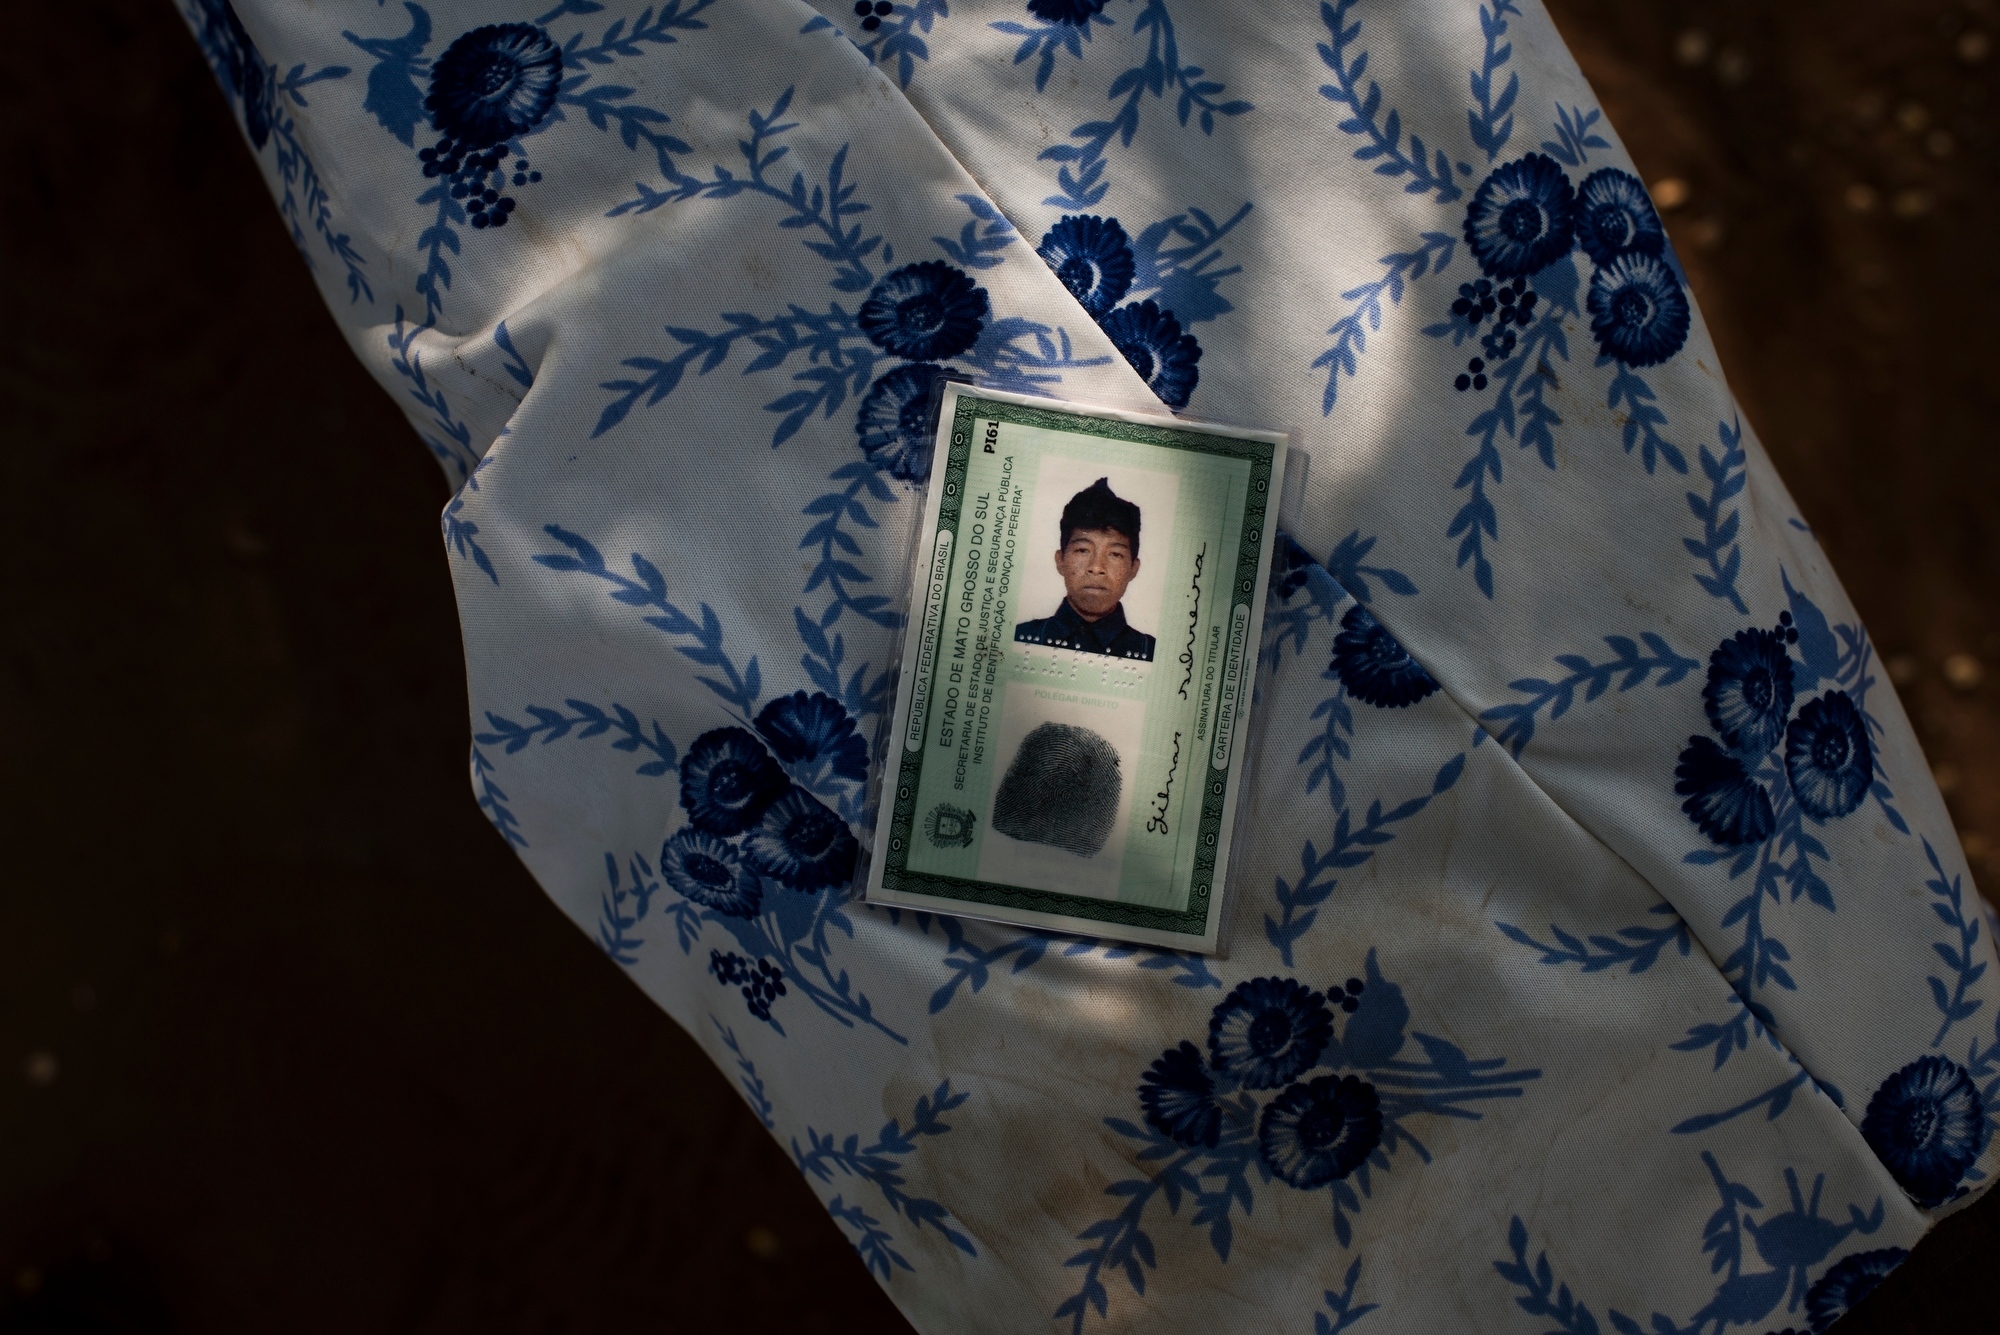 November 30, Maria Silveira, lost two sons, Gilmar, 16, and Junior, 21, to suicide in the community of Sassoro where 10 people killed themselves last year. This was Gilmar&#39;s ID